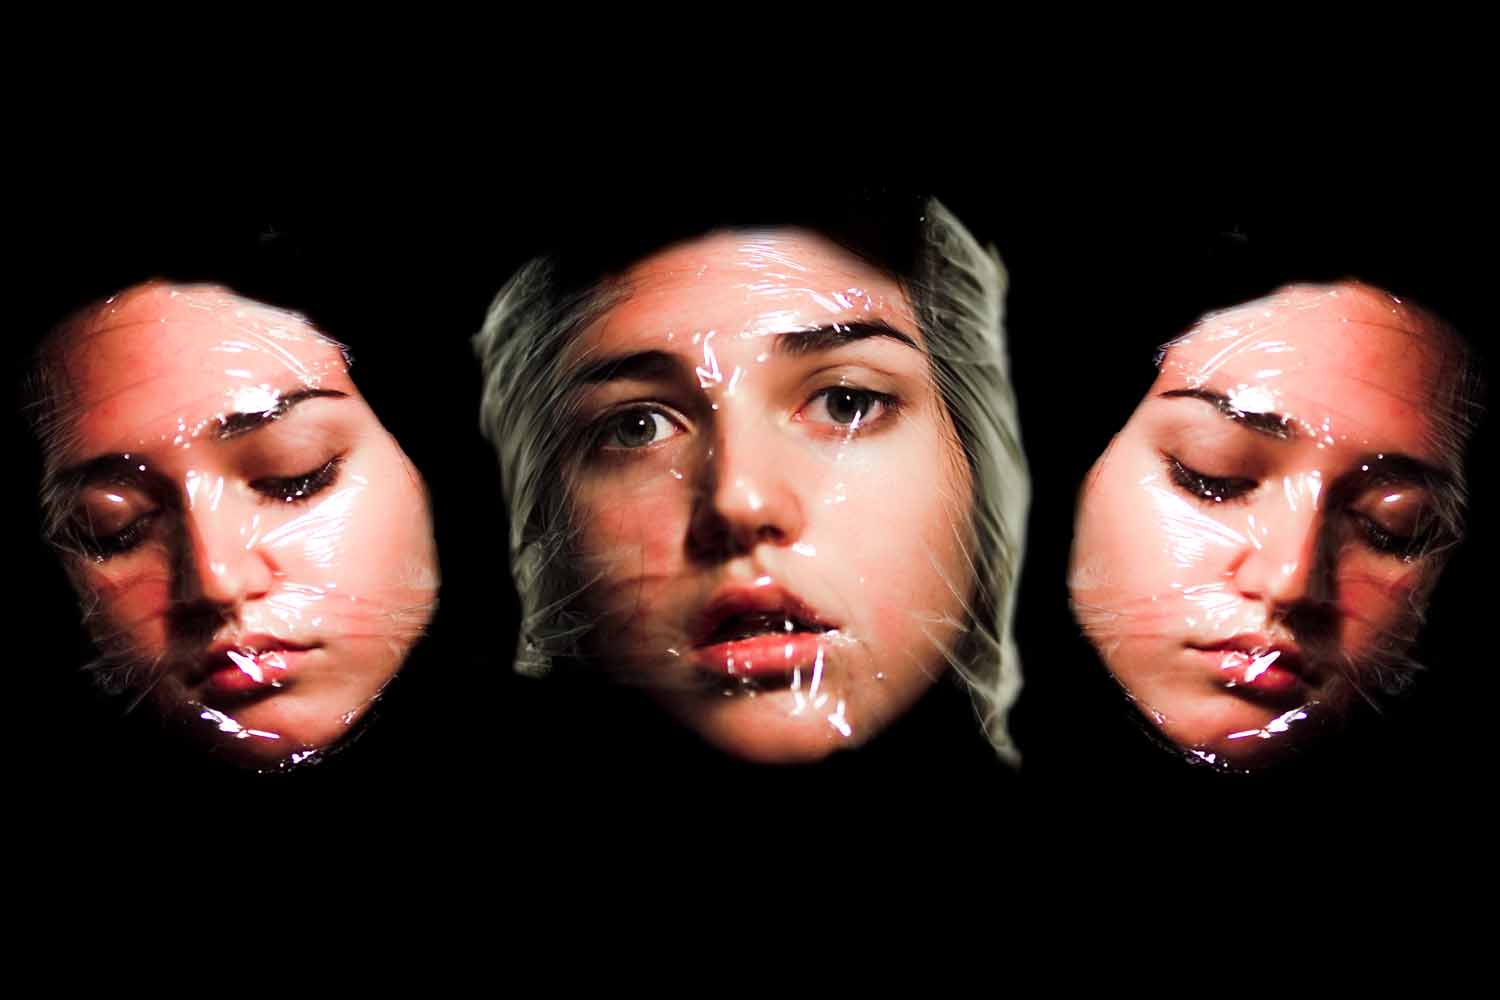 three distorted faces